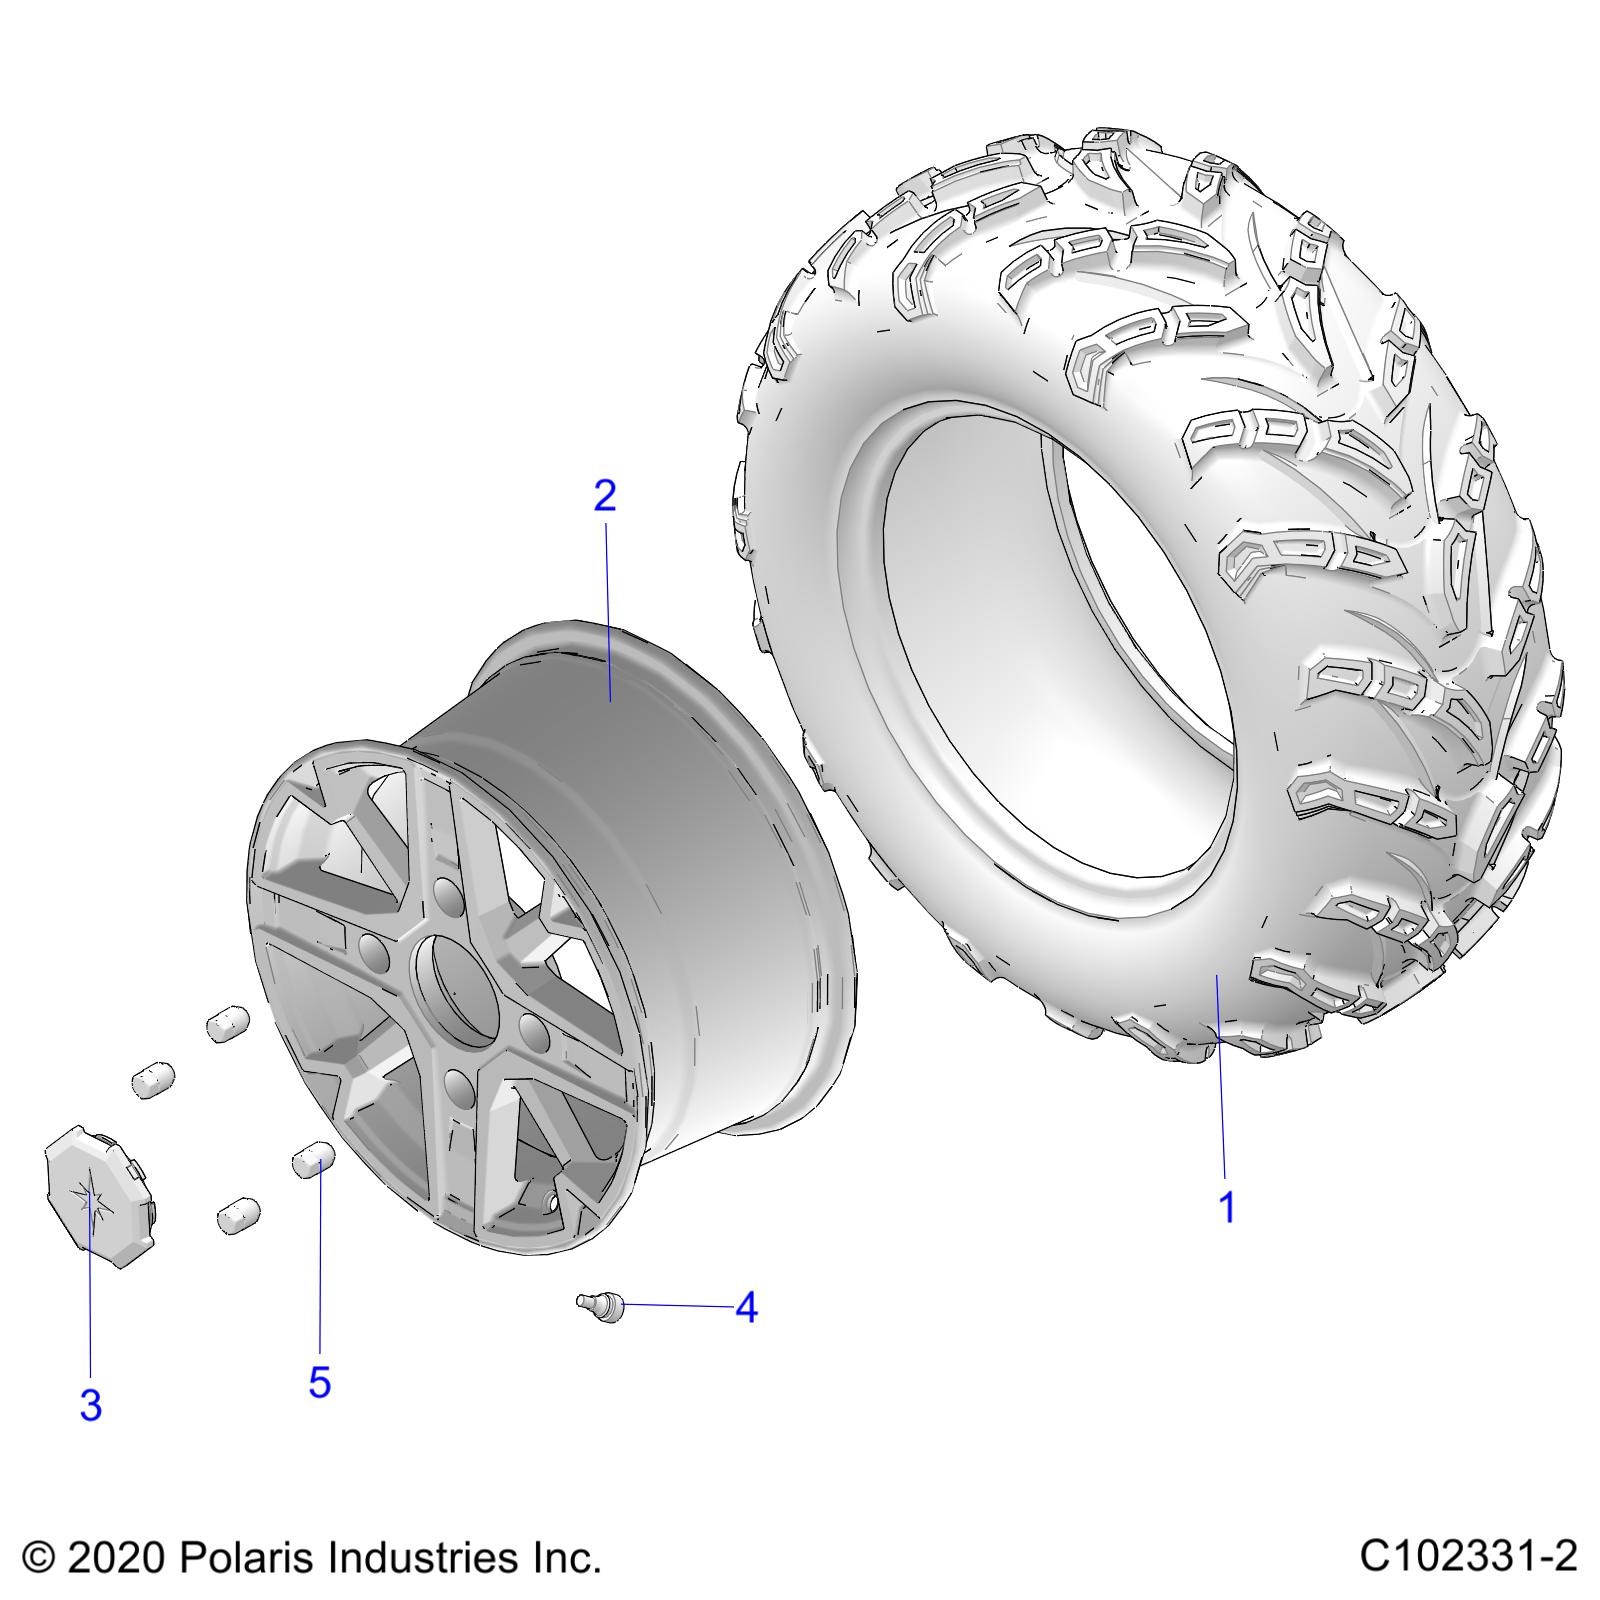 Part Number : 5415601 TIRE  26 X 1-14